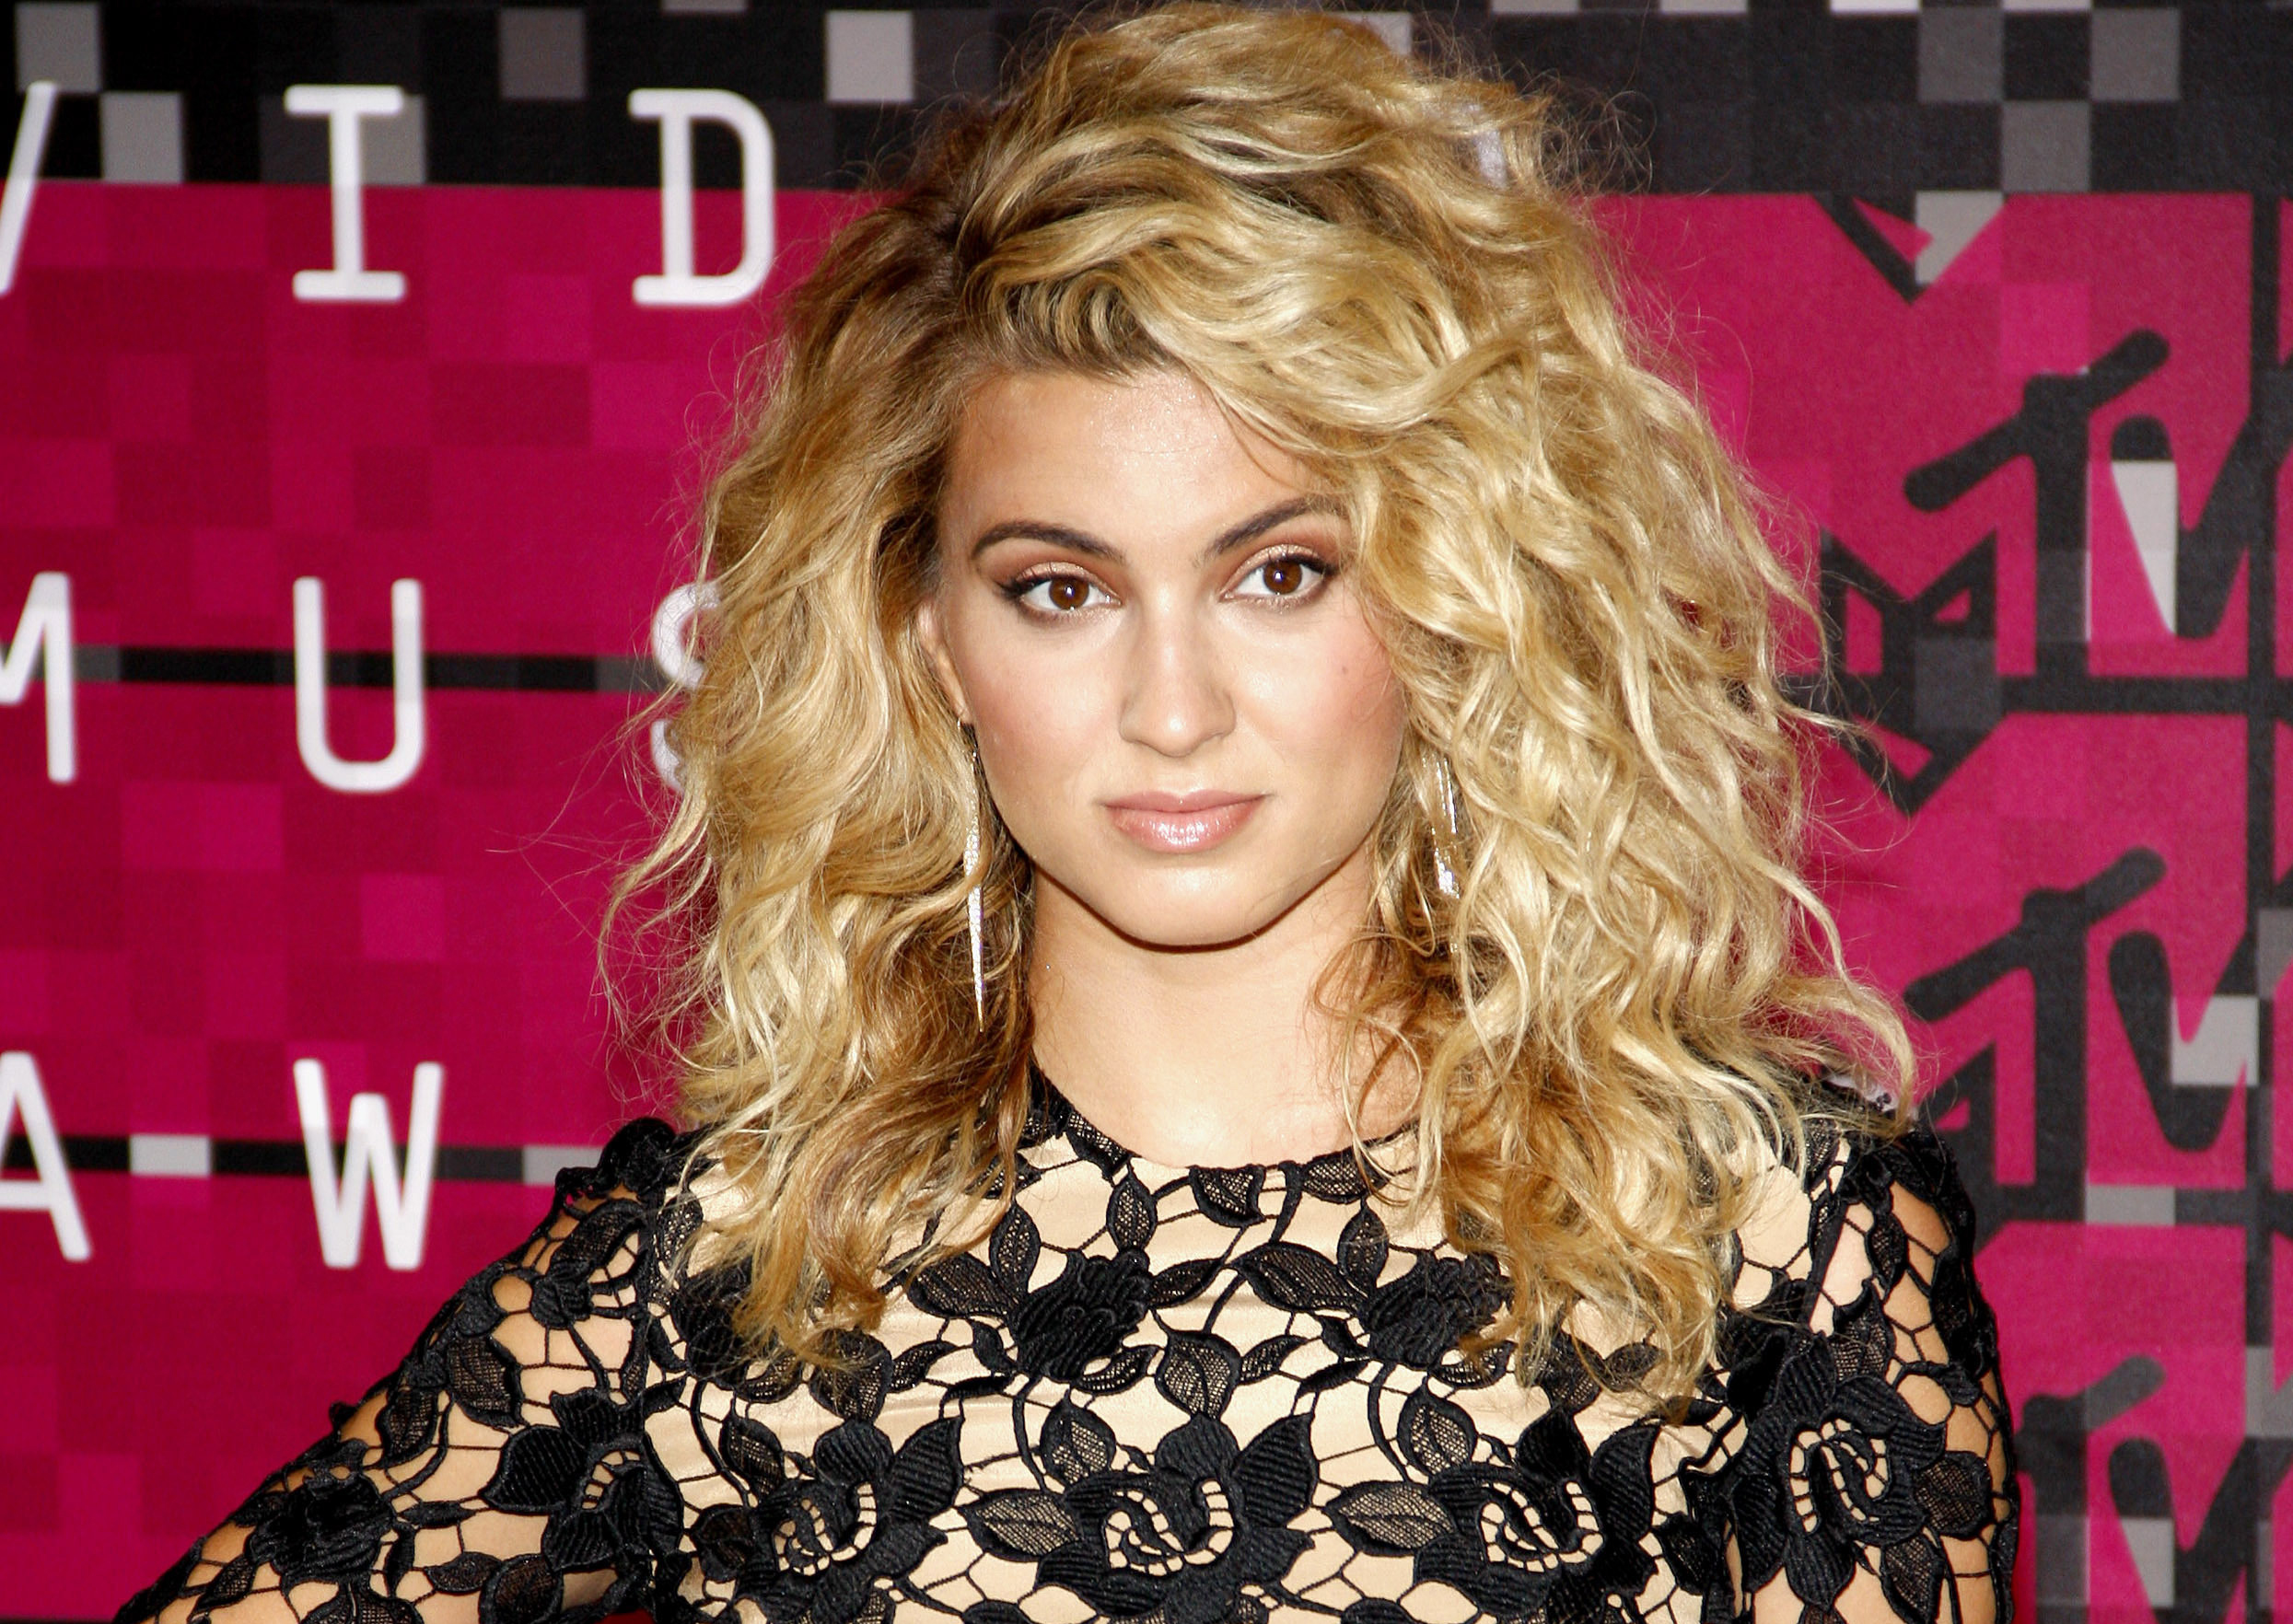 Tori Kelly is the New Face of Justin Timberlakeâ € ™ s William Rast.